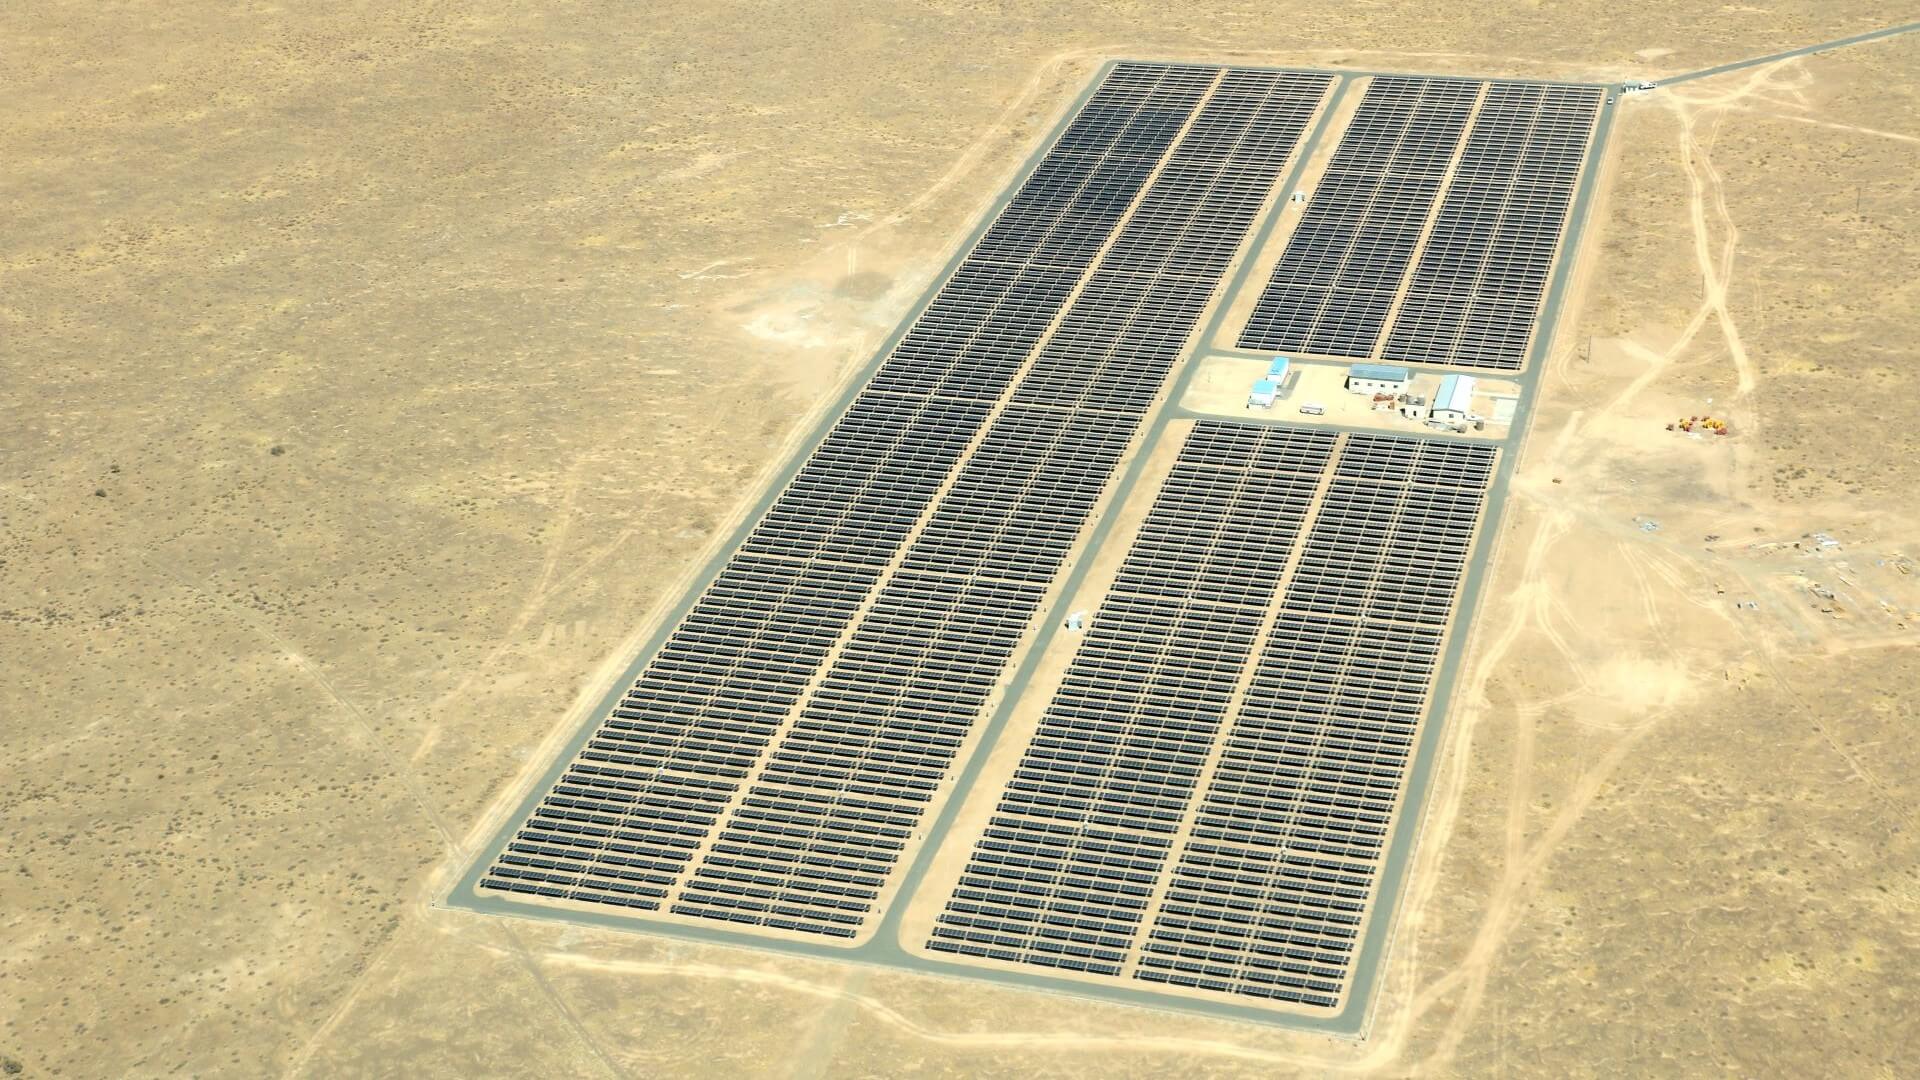 Aerialview of African solar farm's solar panels surrounded by desert sand